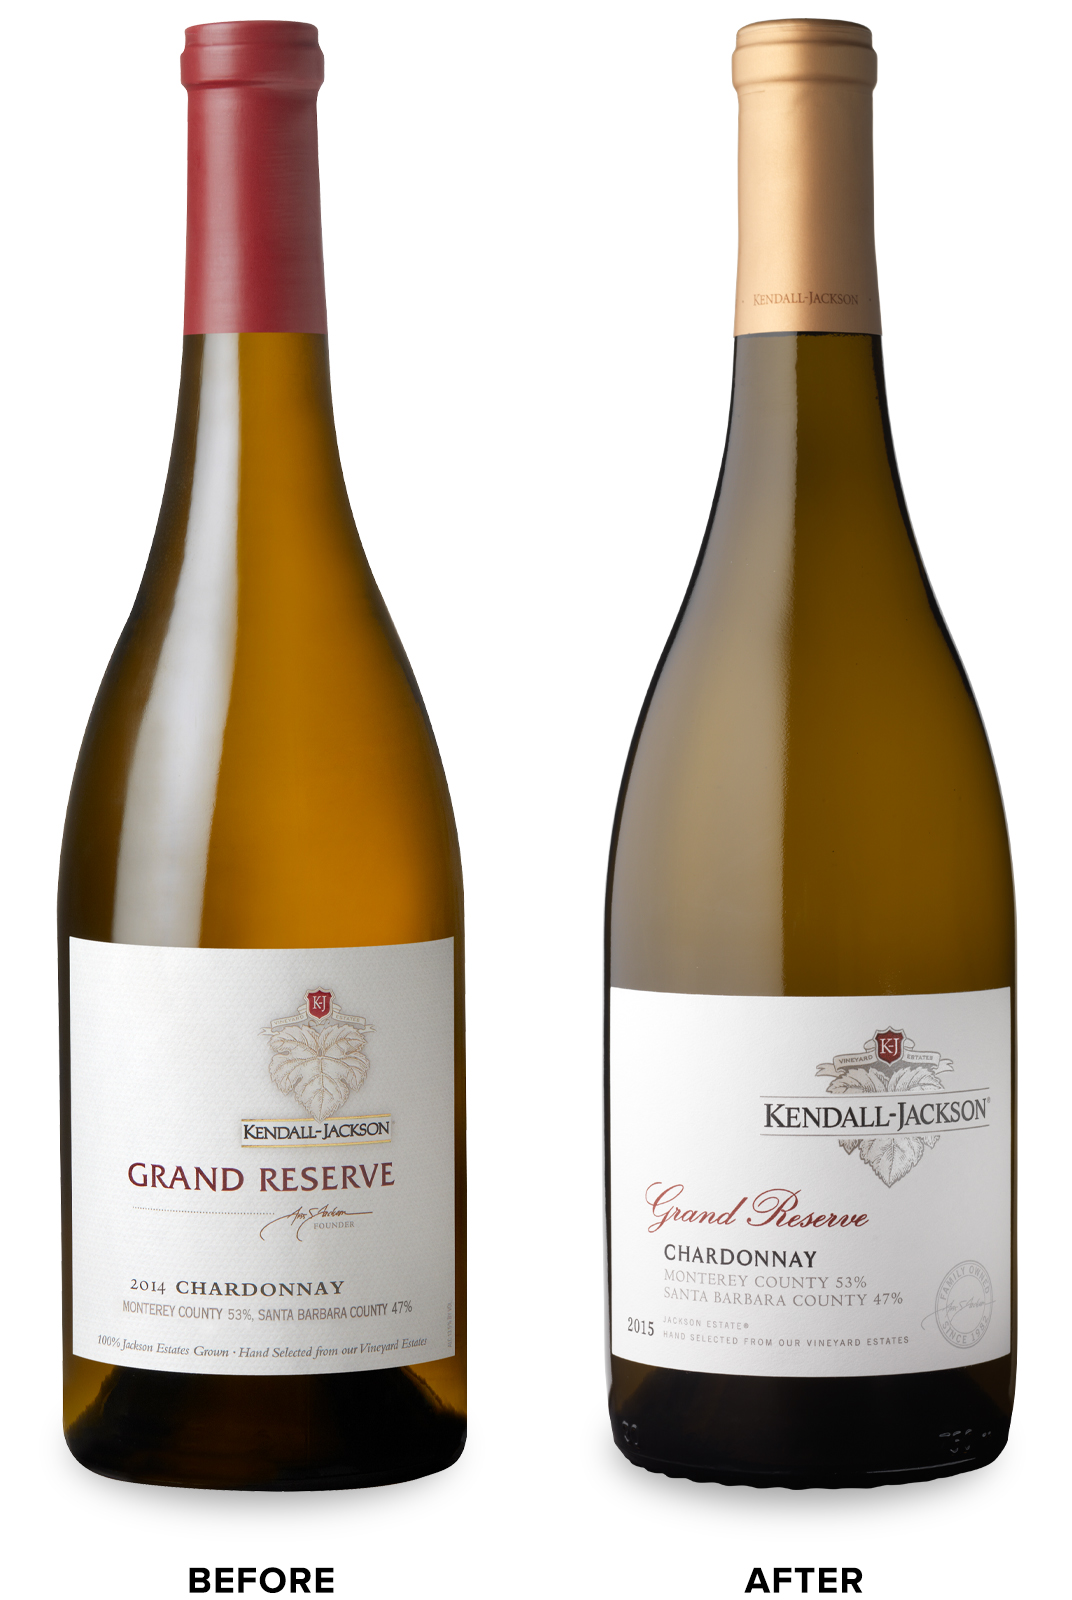 Kendall-Jackson Grand Reserve White Wine Packaging Before Redesign on Left & After on Right